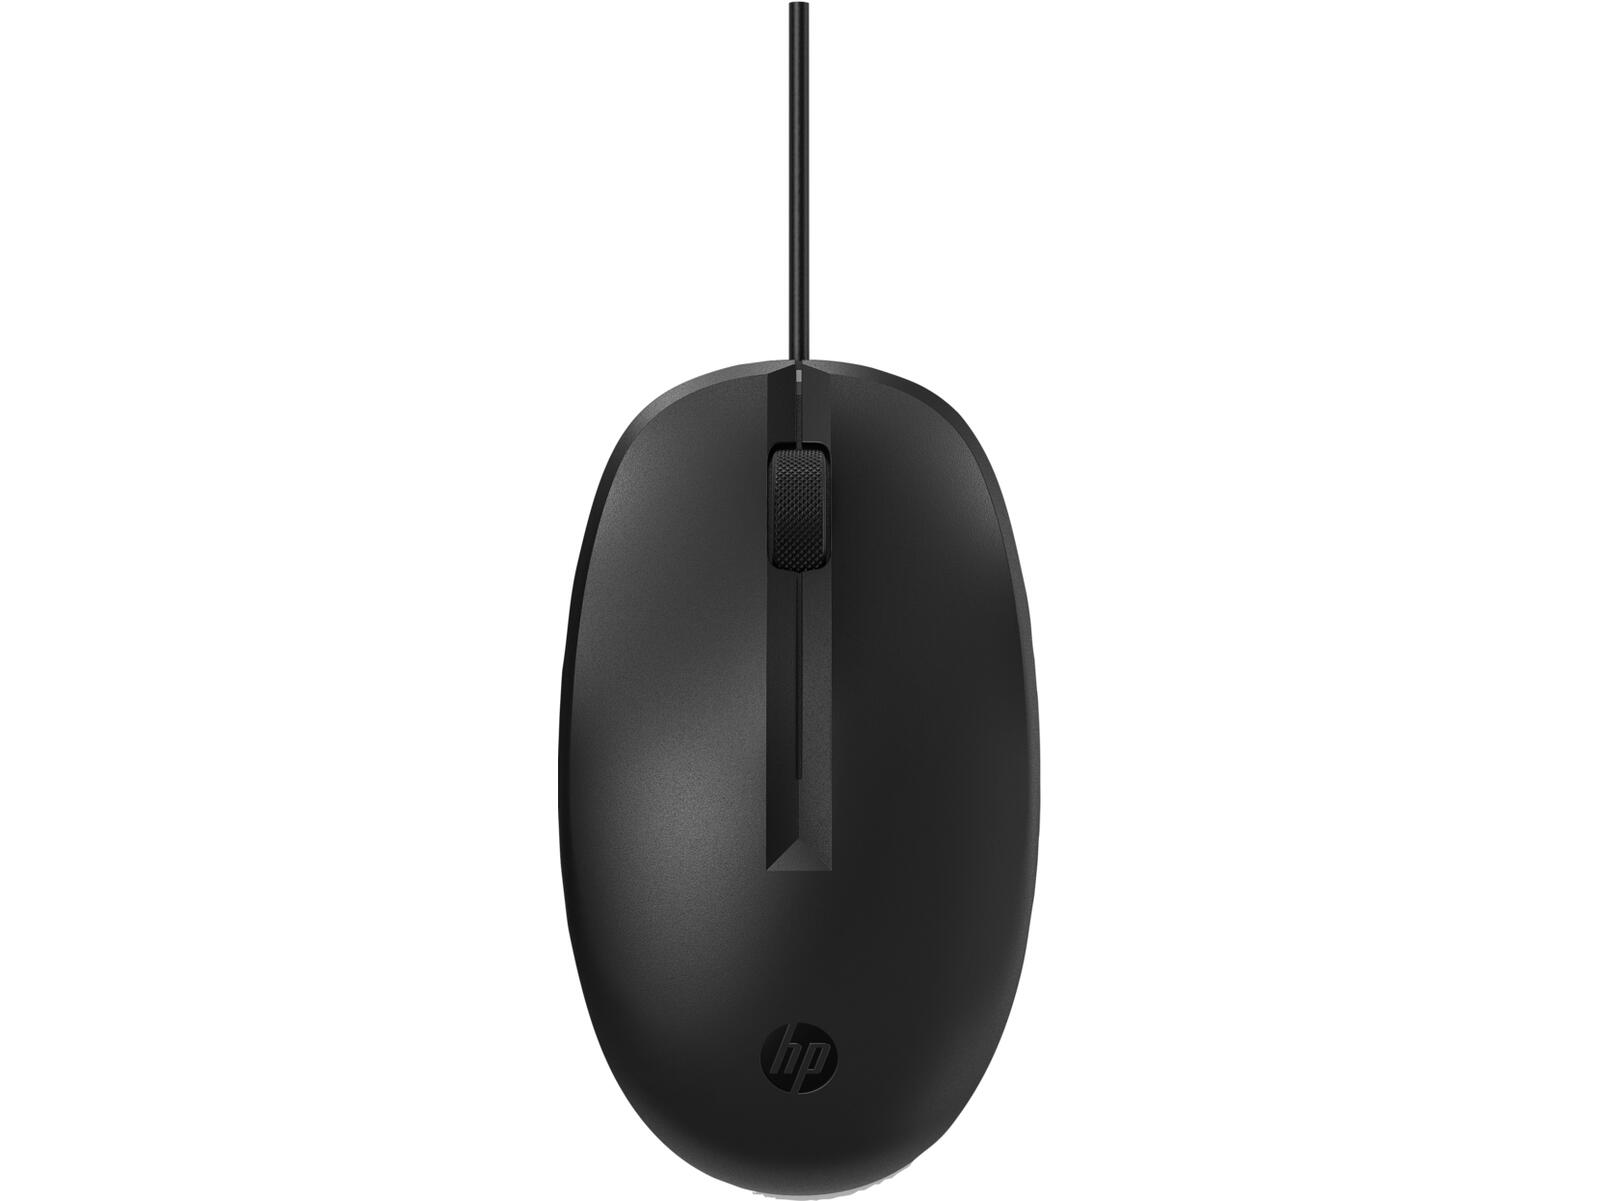 HP 128 laser wired mouse Datora pele